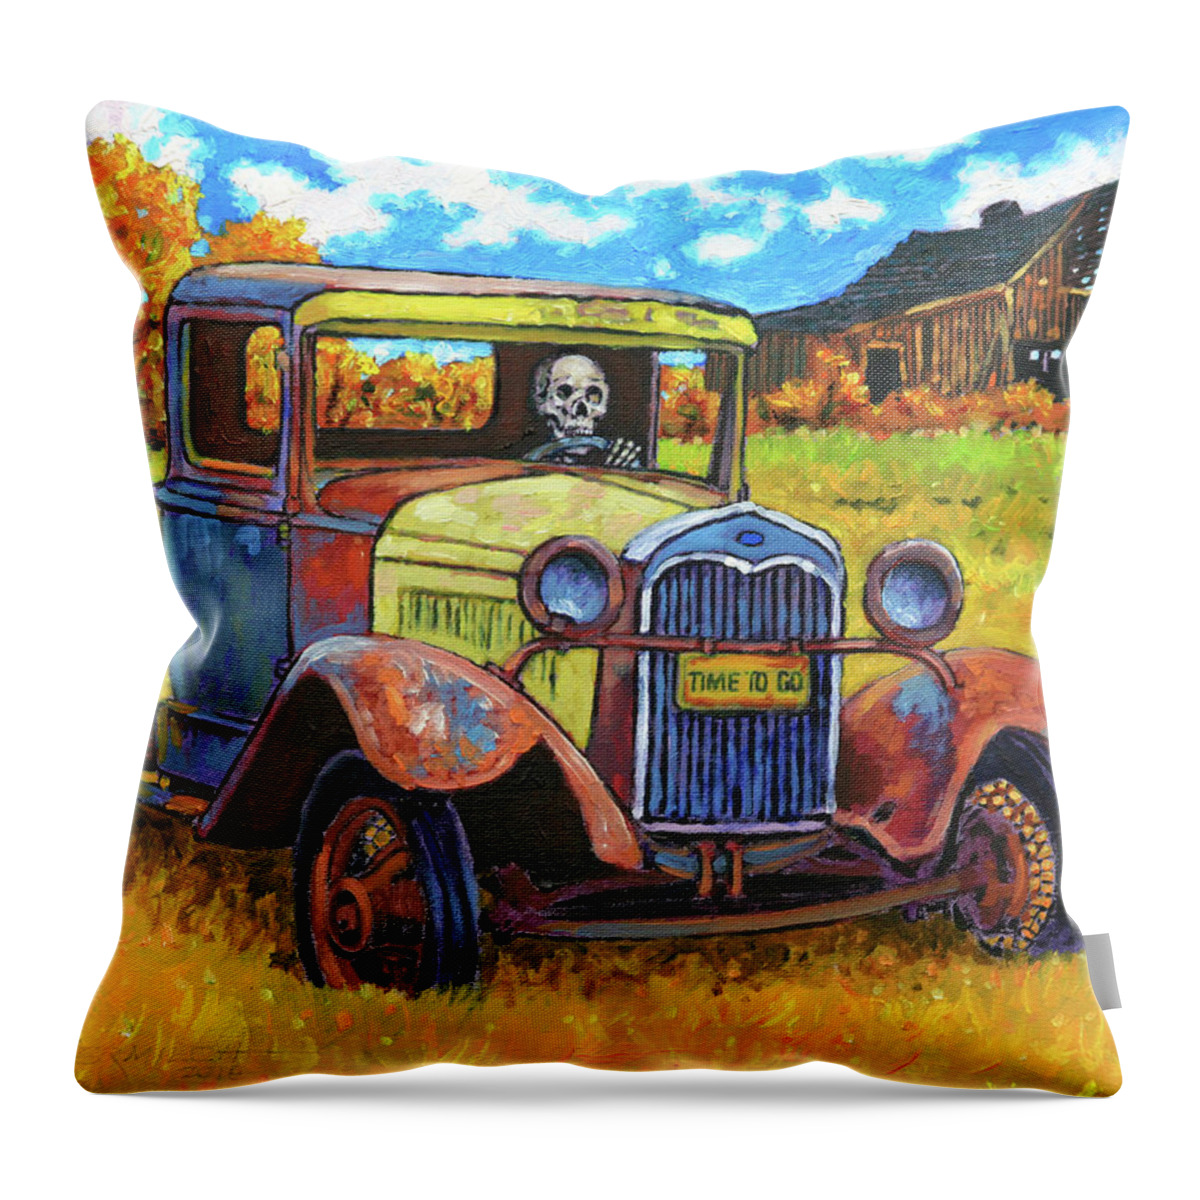 Old Truck Throw Pillow featuring the painting Getting Old Time to Go by John Lautermilch